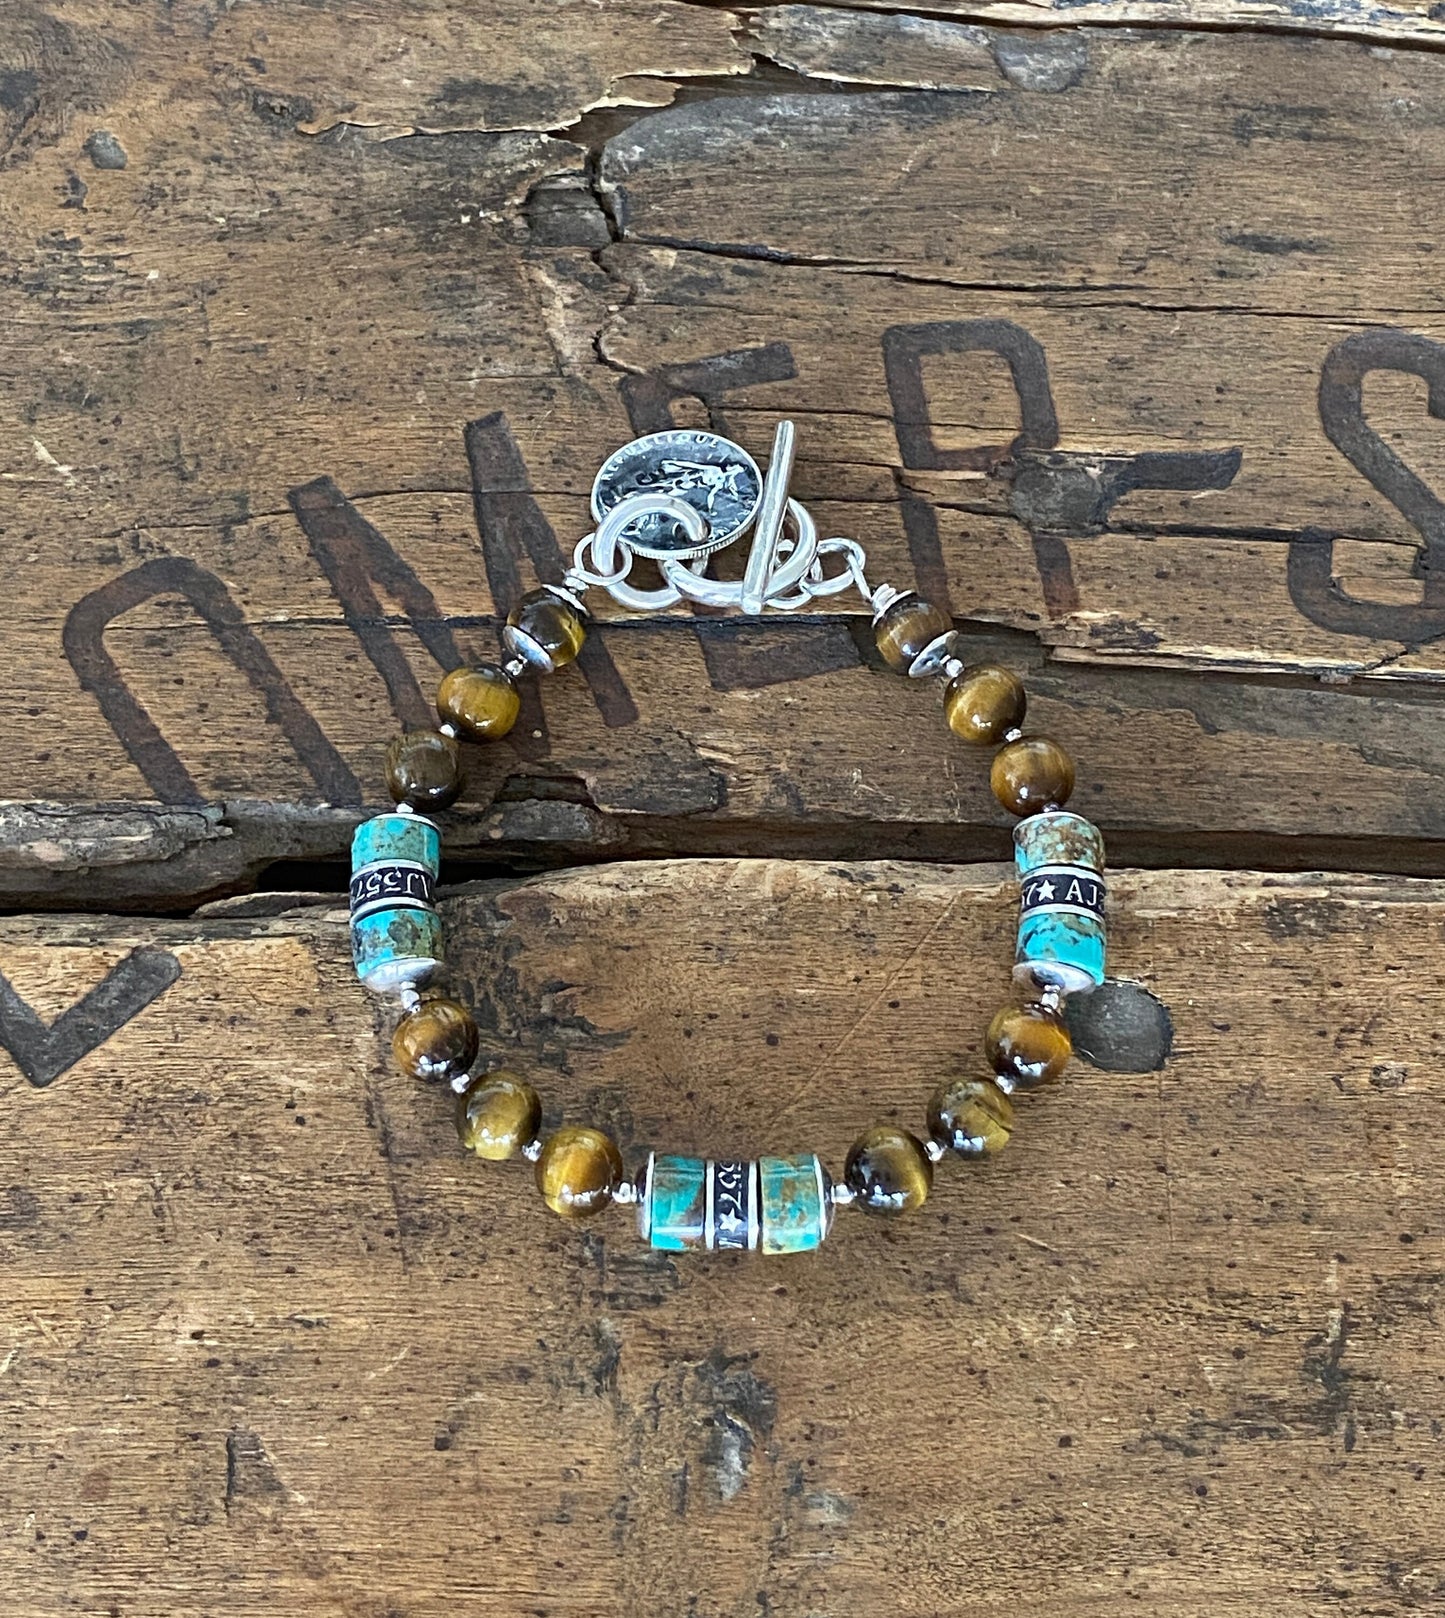 The Pacific Bracelet is made of, Turquoise, sterling silver, Vintage coin and Tiger eye 8mm Beads.